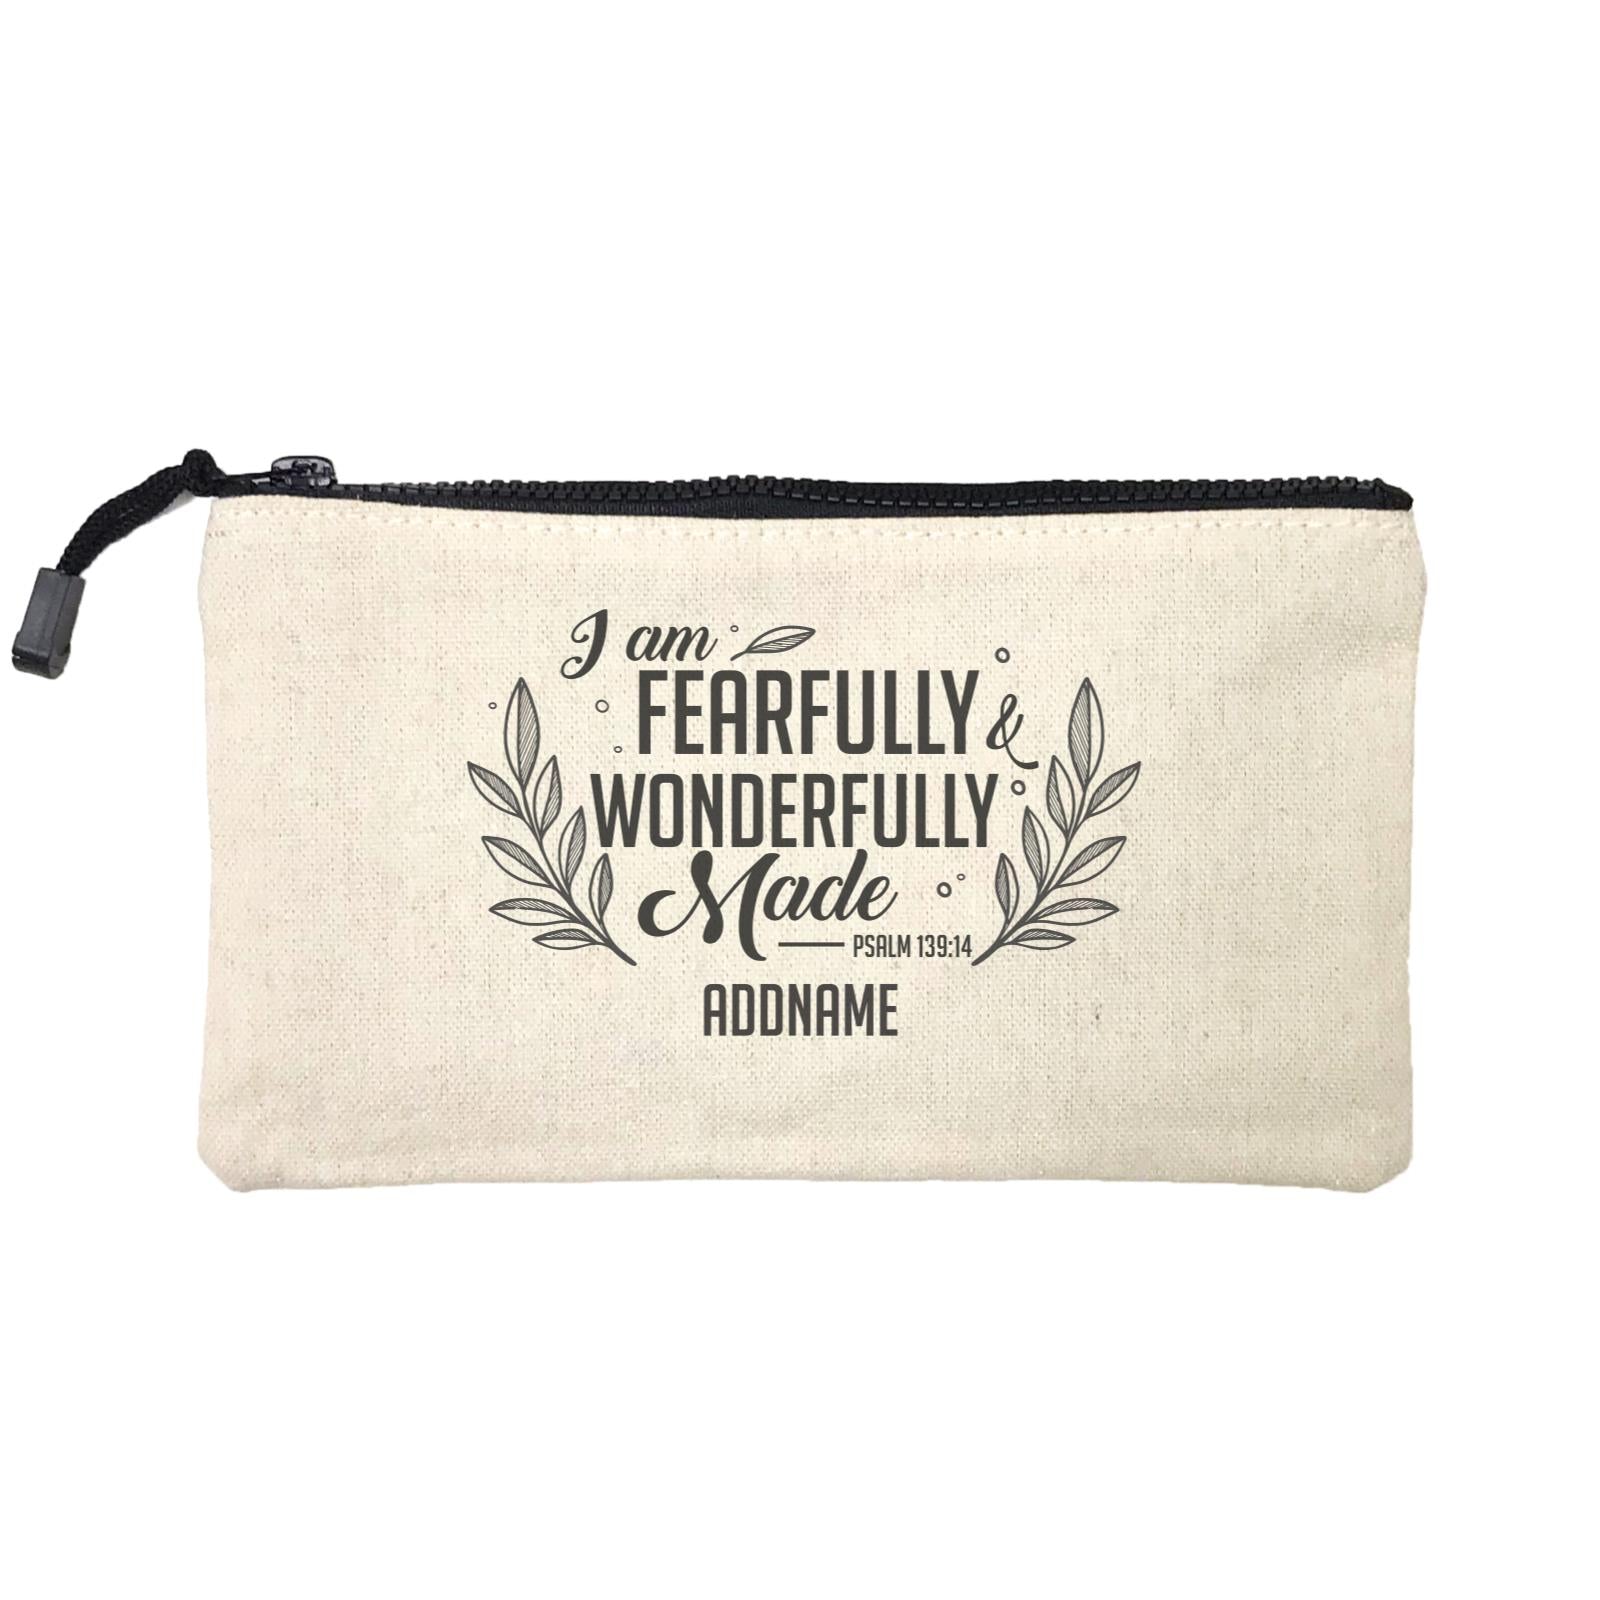 Christ Newborn I Am Fearfully Wonderfully Made Psalm 139.14 Addname Mini Accessories Stationery Pouch